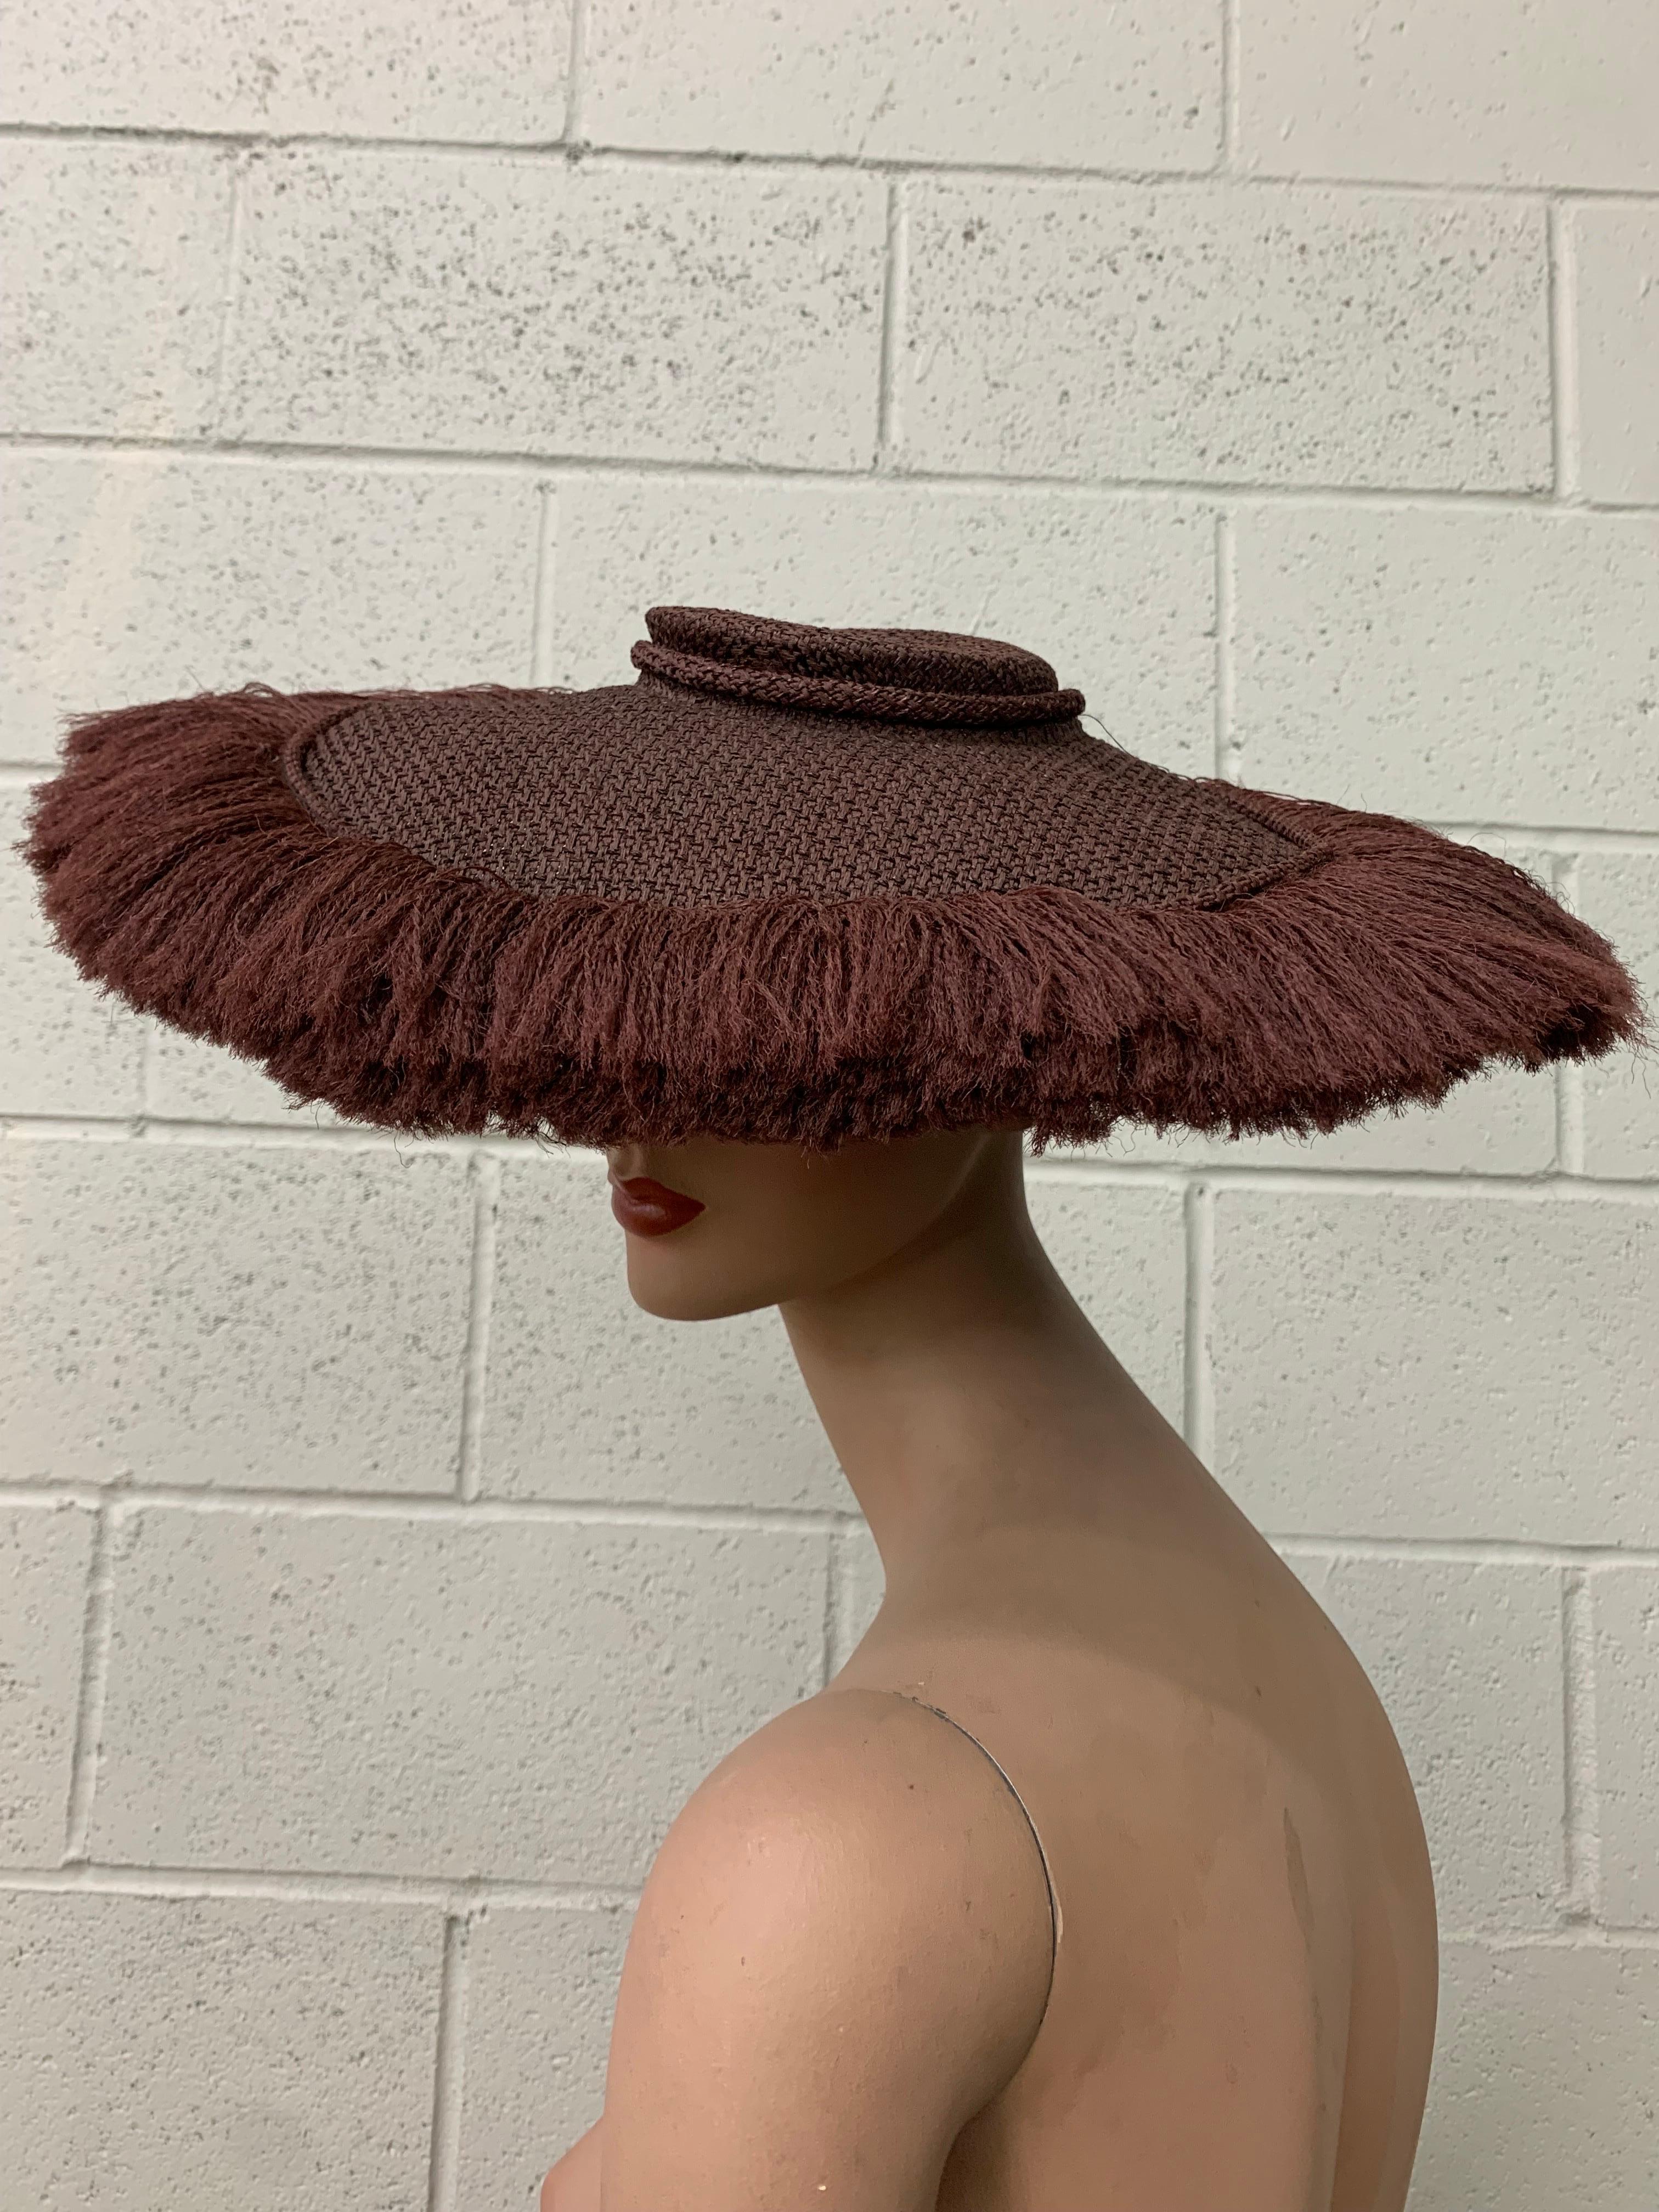 1940s Shenley's Cocoa Brown Rayon Woven & Fringed Saucer Hat w Low Crown:  Nicely structured inner band and at the brim for stability. Stunning silhouette. Woven crown fabric is used as a heavy curtain of fringe at edge. One size fits all with pins